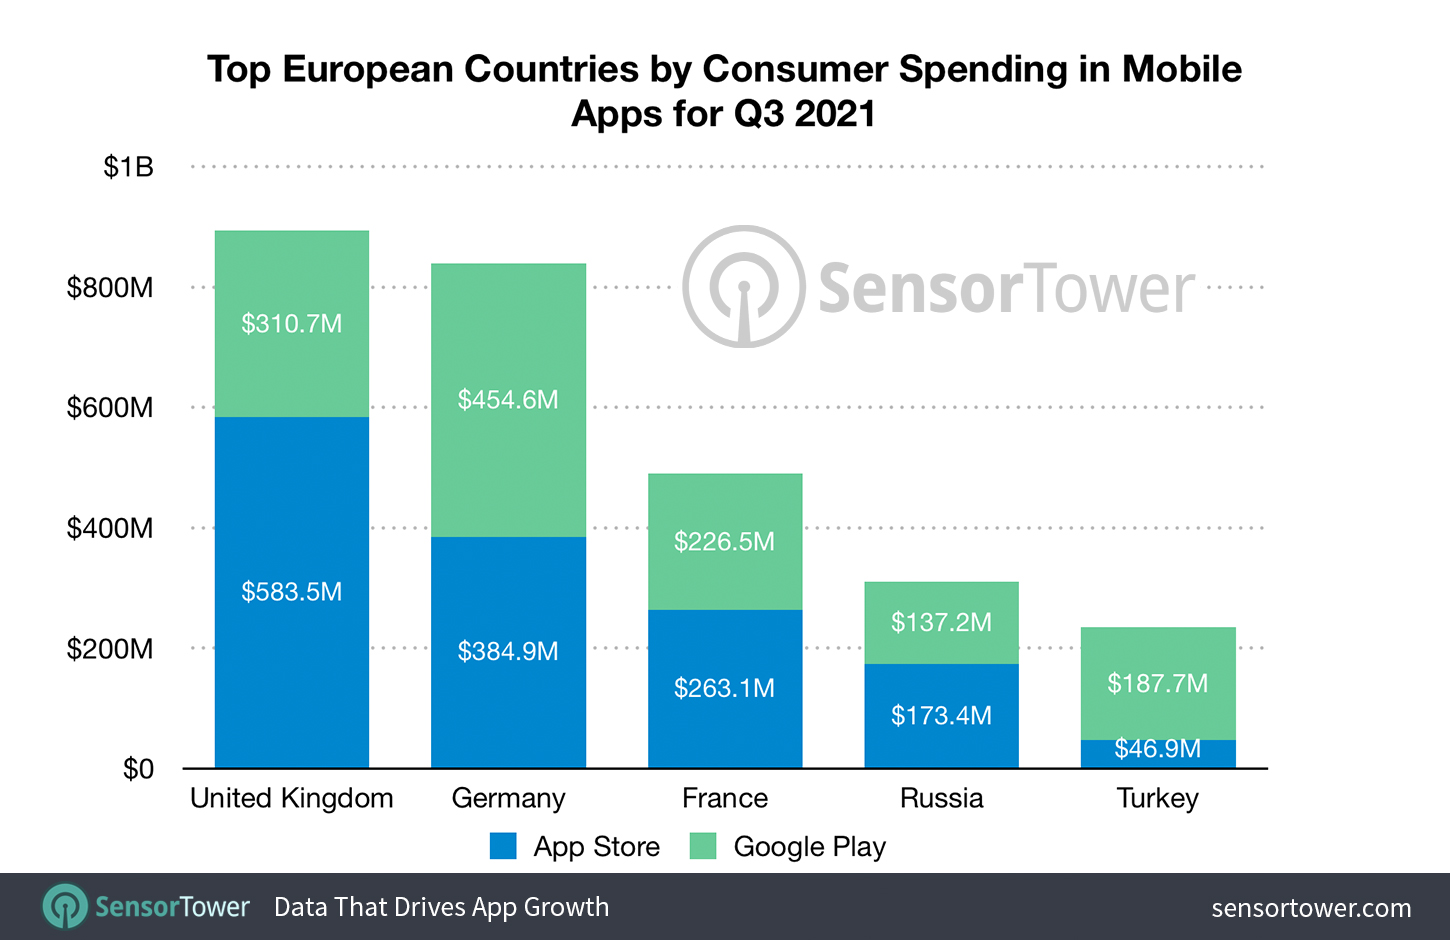 Europe’s Top Revenue Generating Countries for Mobile App Spend in Q3 2021